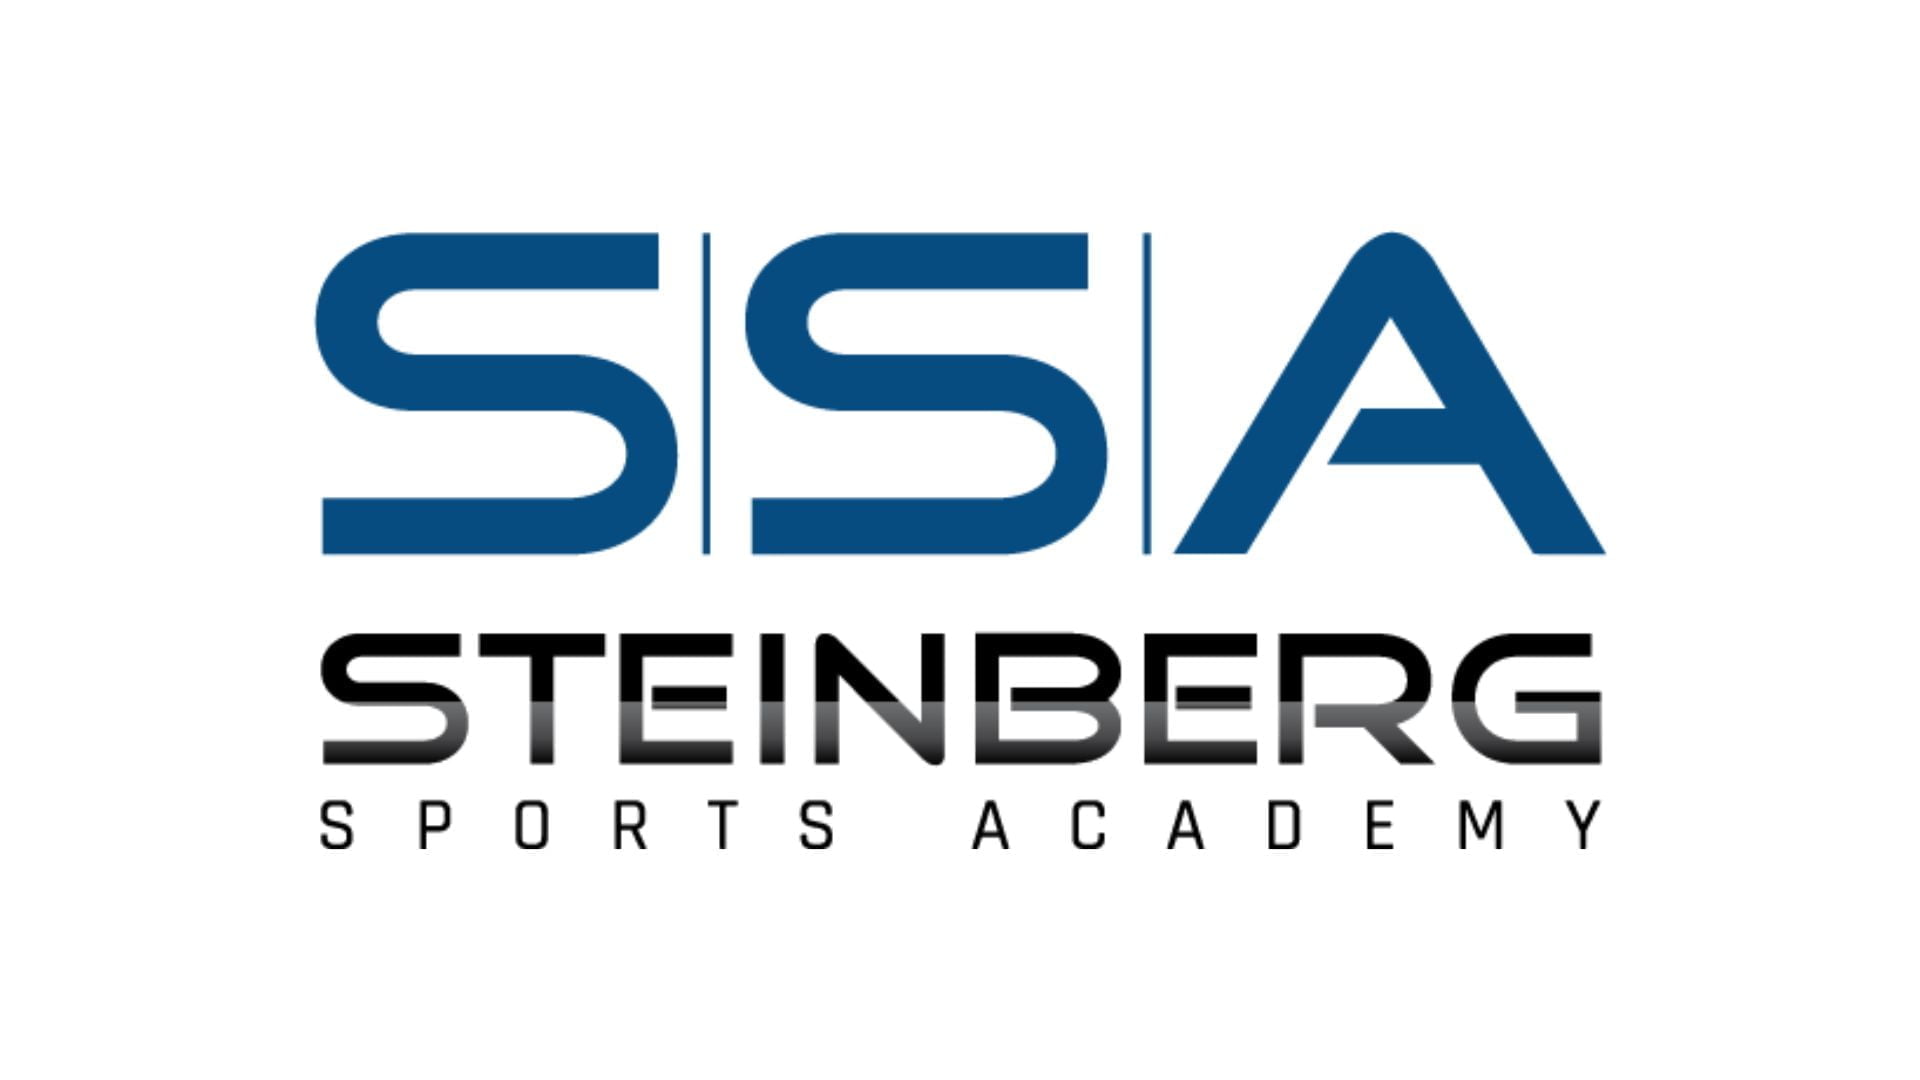 Steinberg Sports Academy Announces Opening for High School Focused on Academics and Athletics